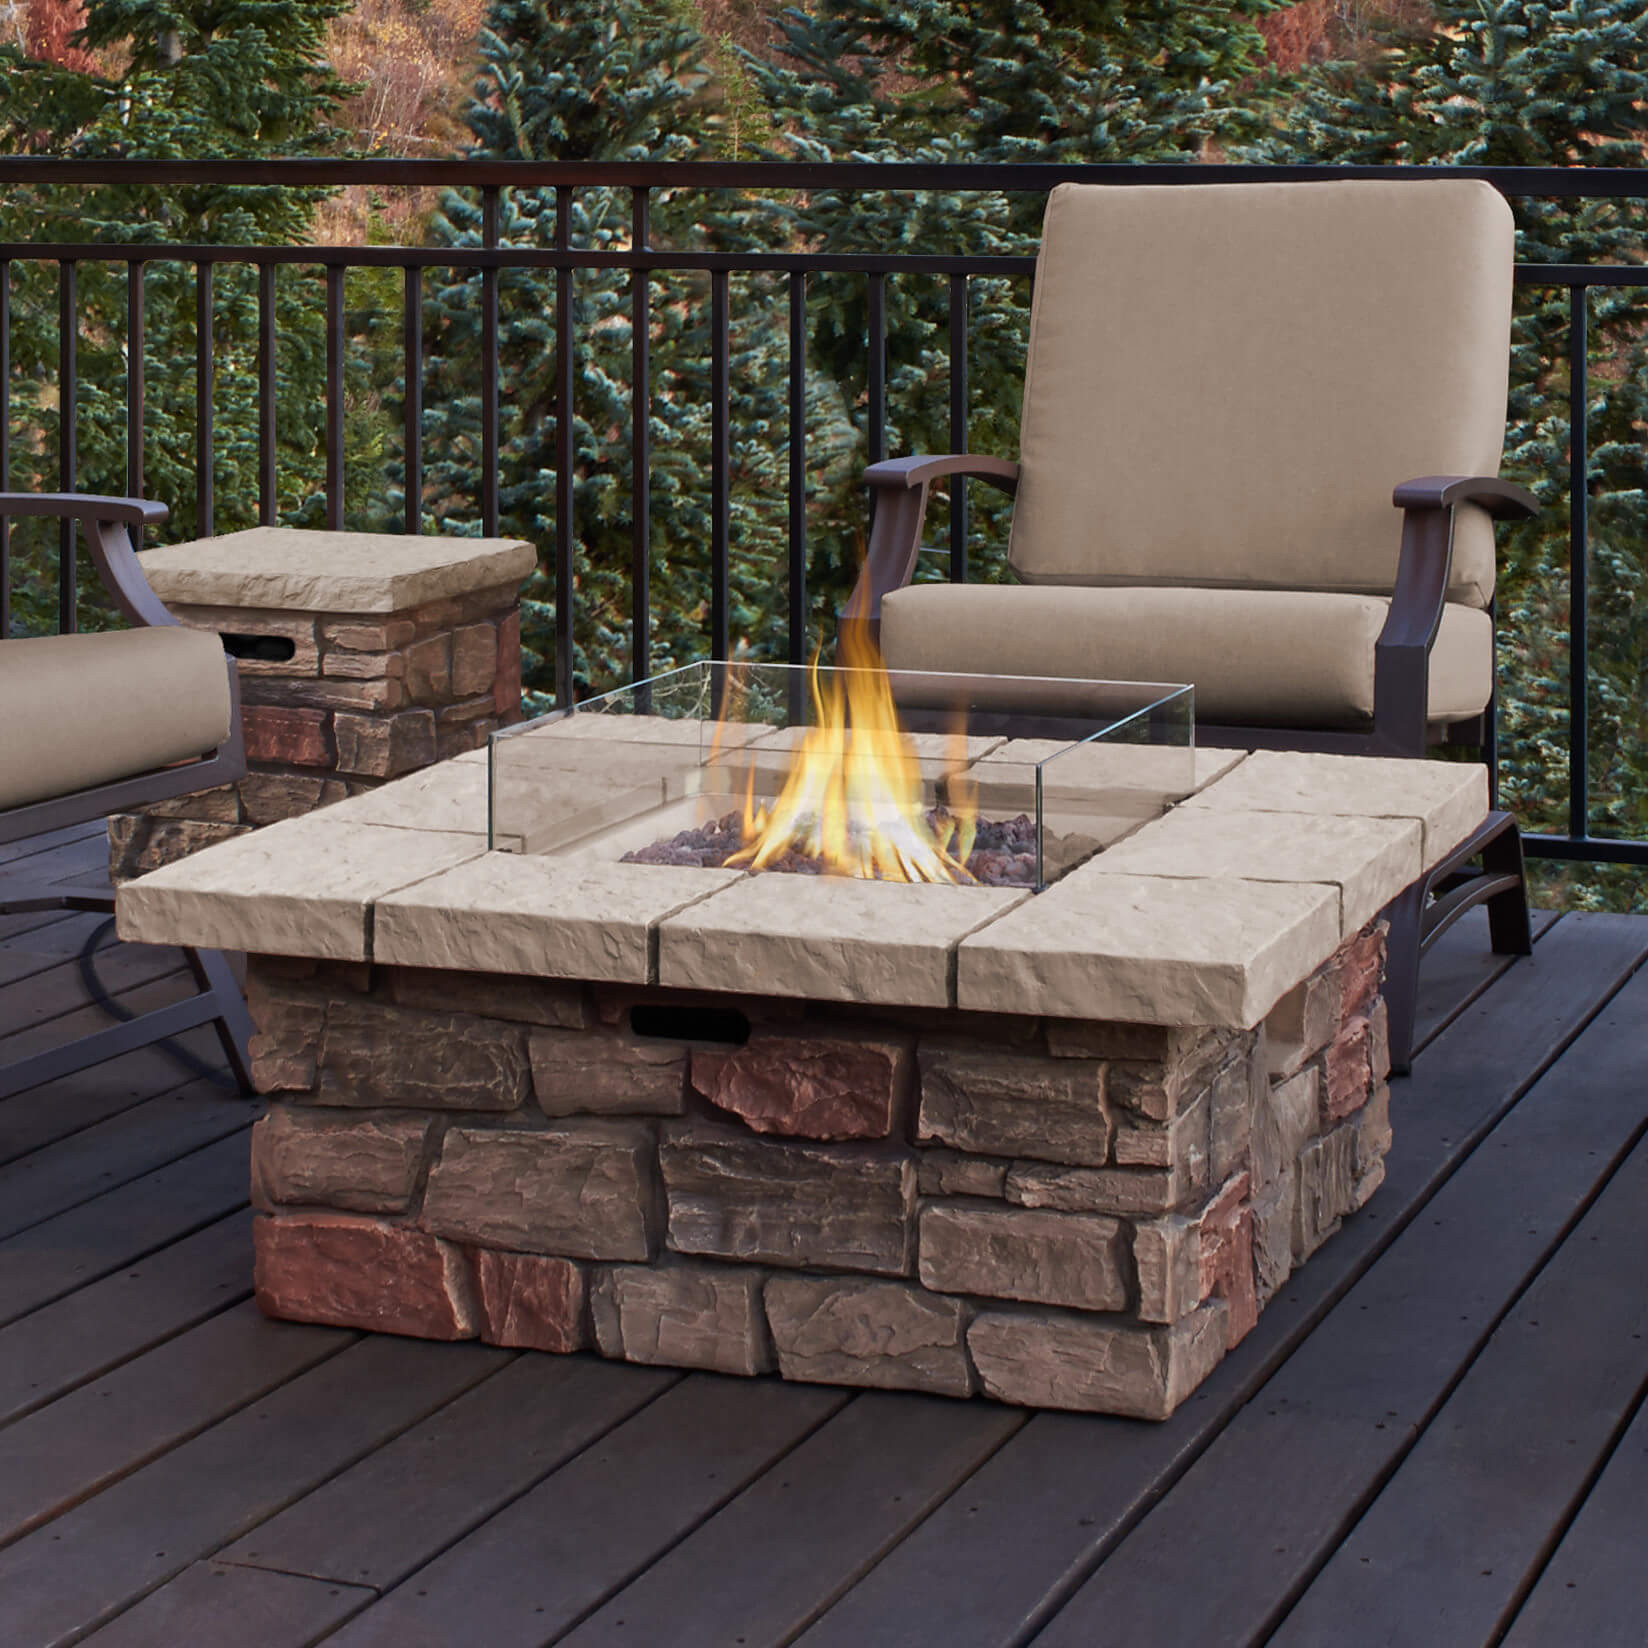 Patio Tables With Fire Pits
 Top 15 Types of Propane Patio Fire Pits with Table Buying